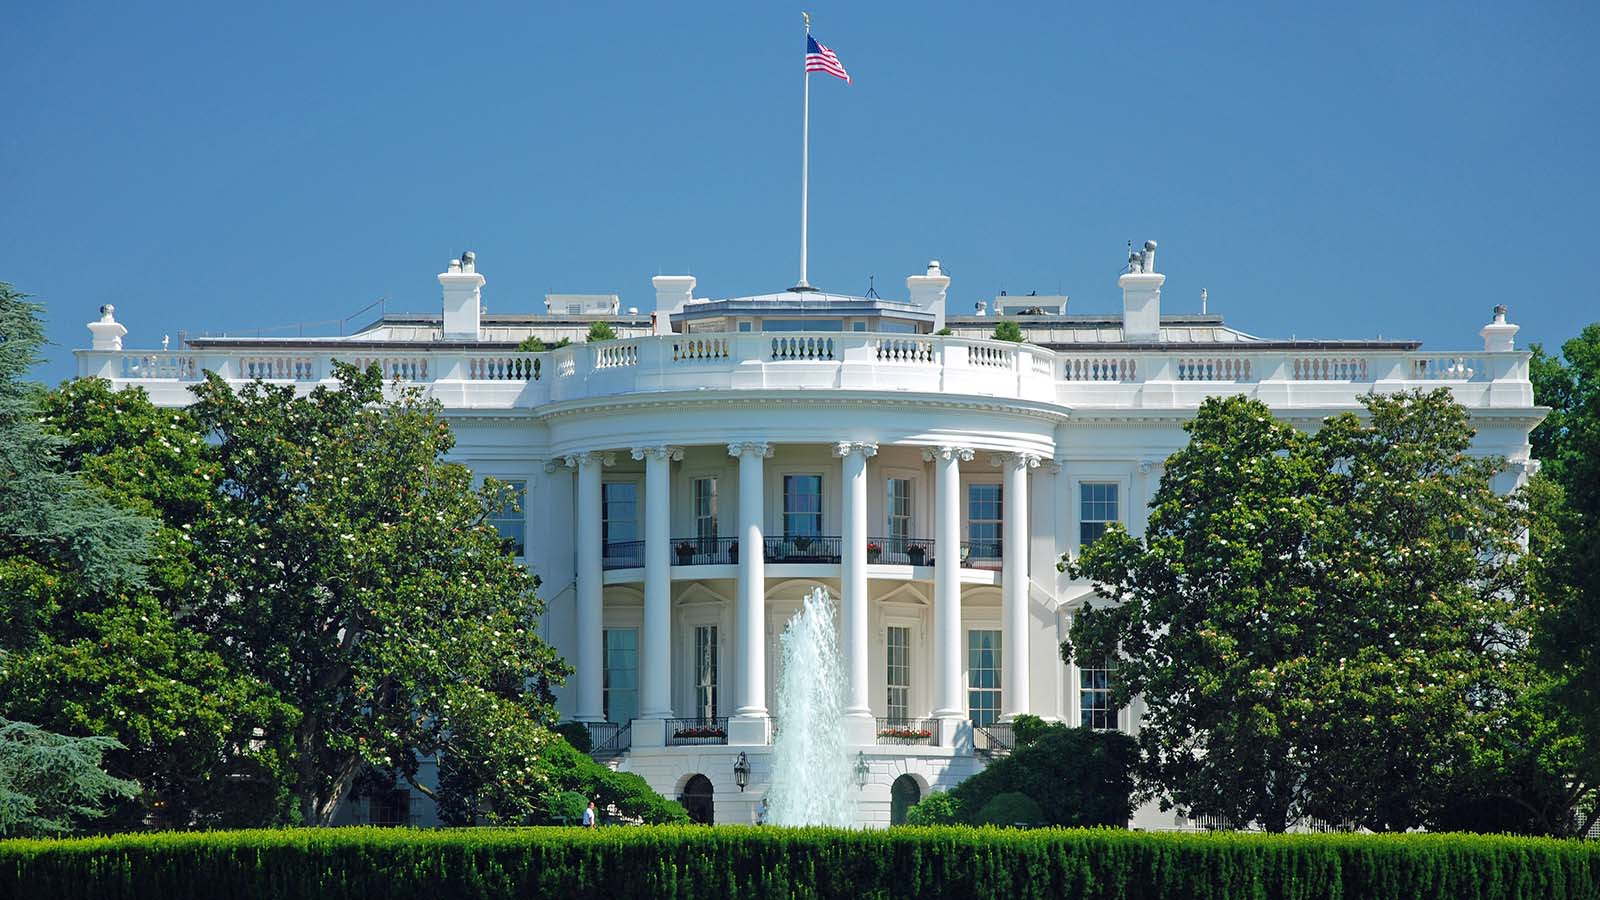 Prove You’re Actually Smart by Acing This General Knowledge Quiz White House, Washington, D.C., United States